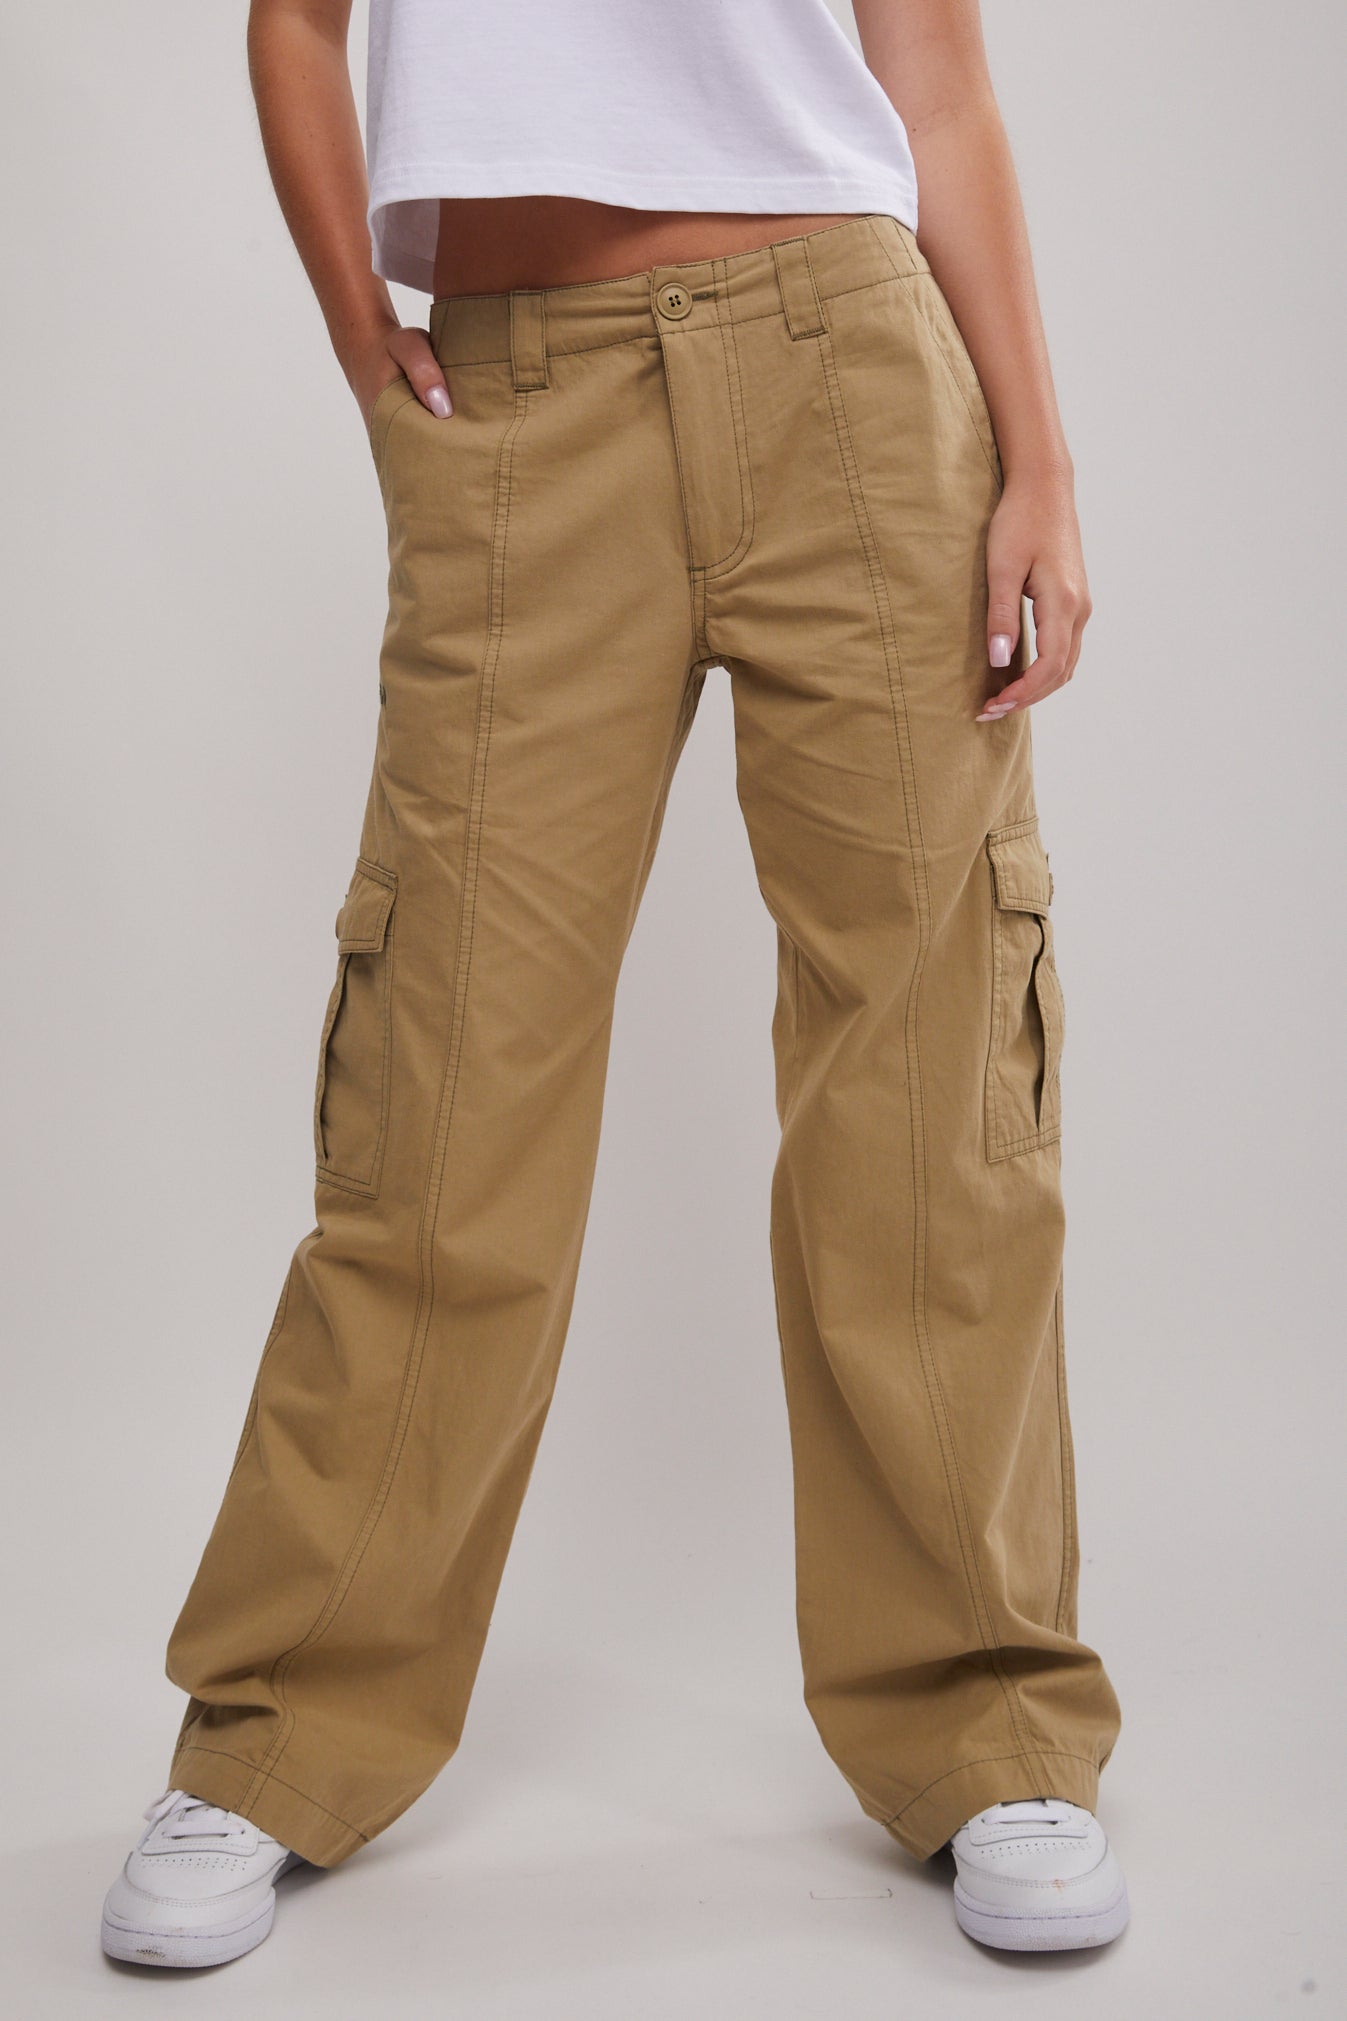 Buy Womenss Stretch Work Pants  Stretchable Pants  Bisley Workwear